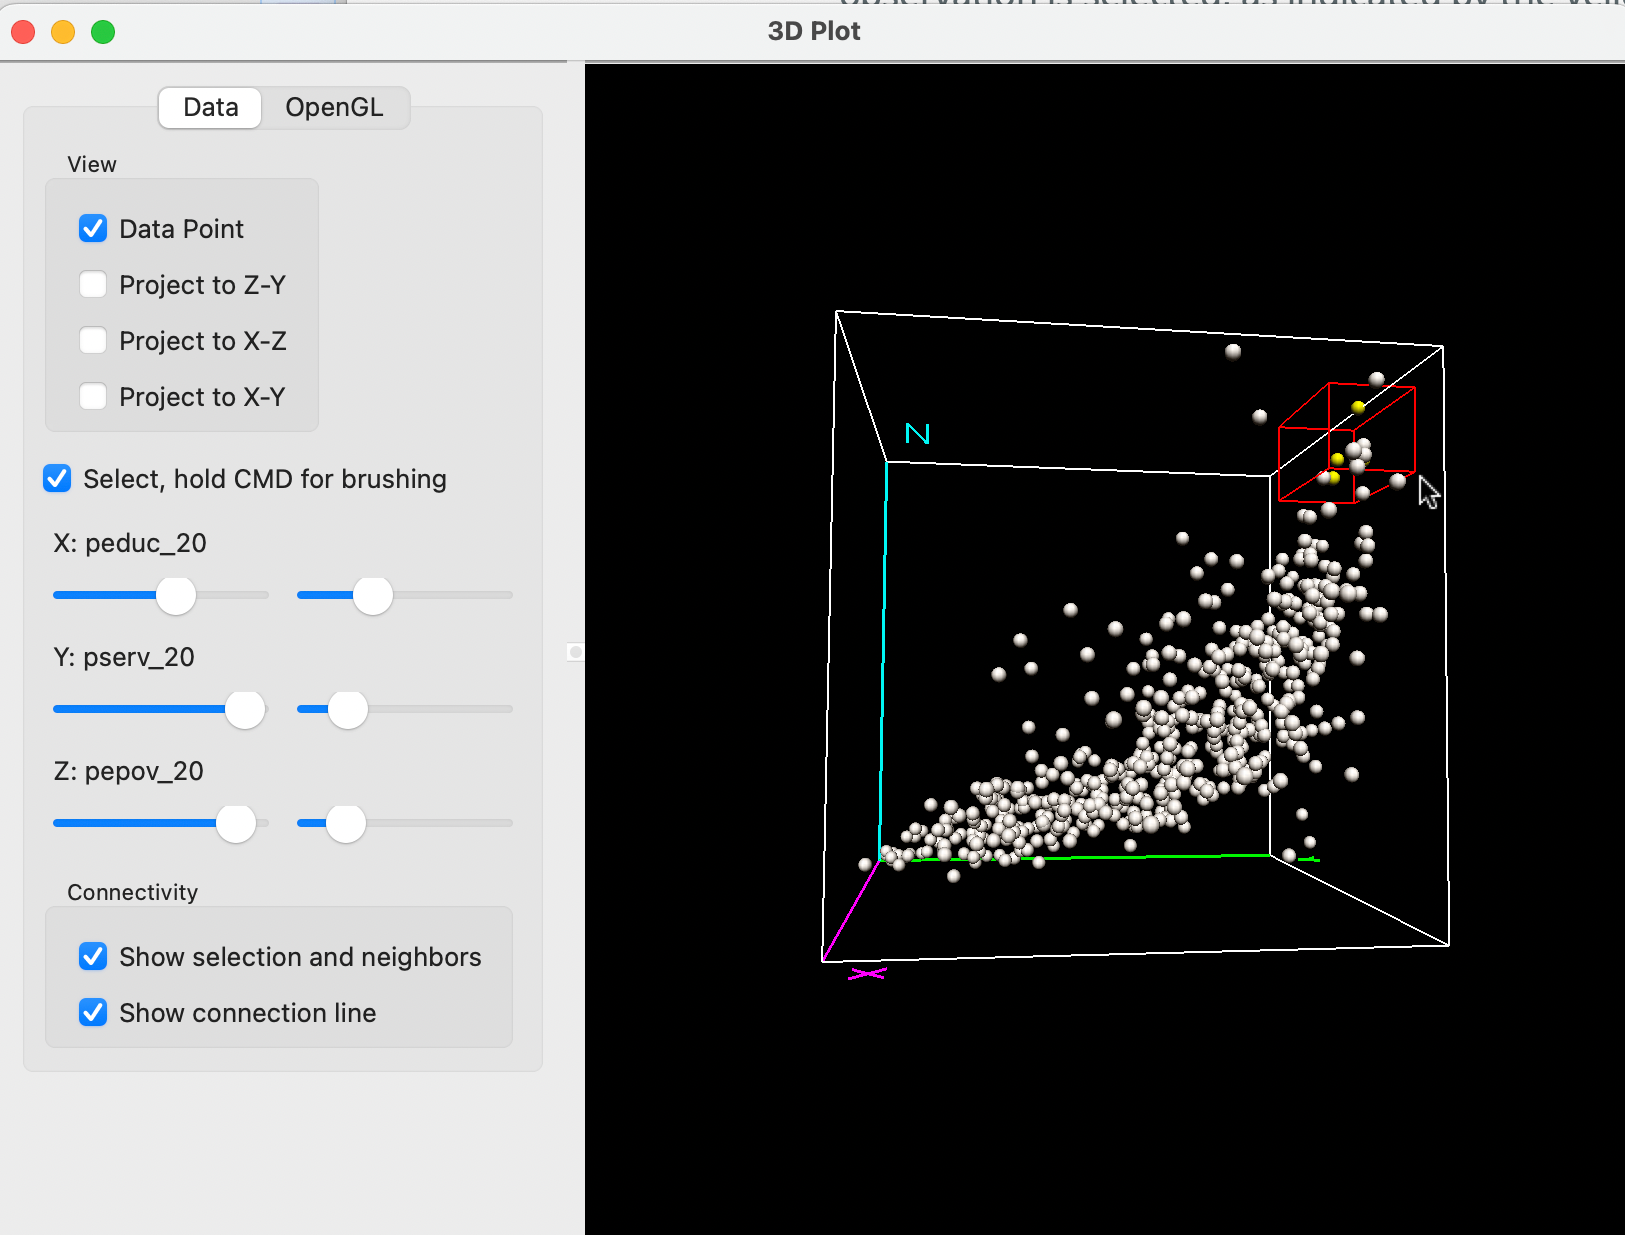 Selection in the 3D scatter plot